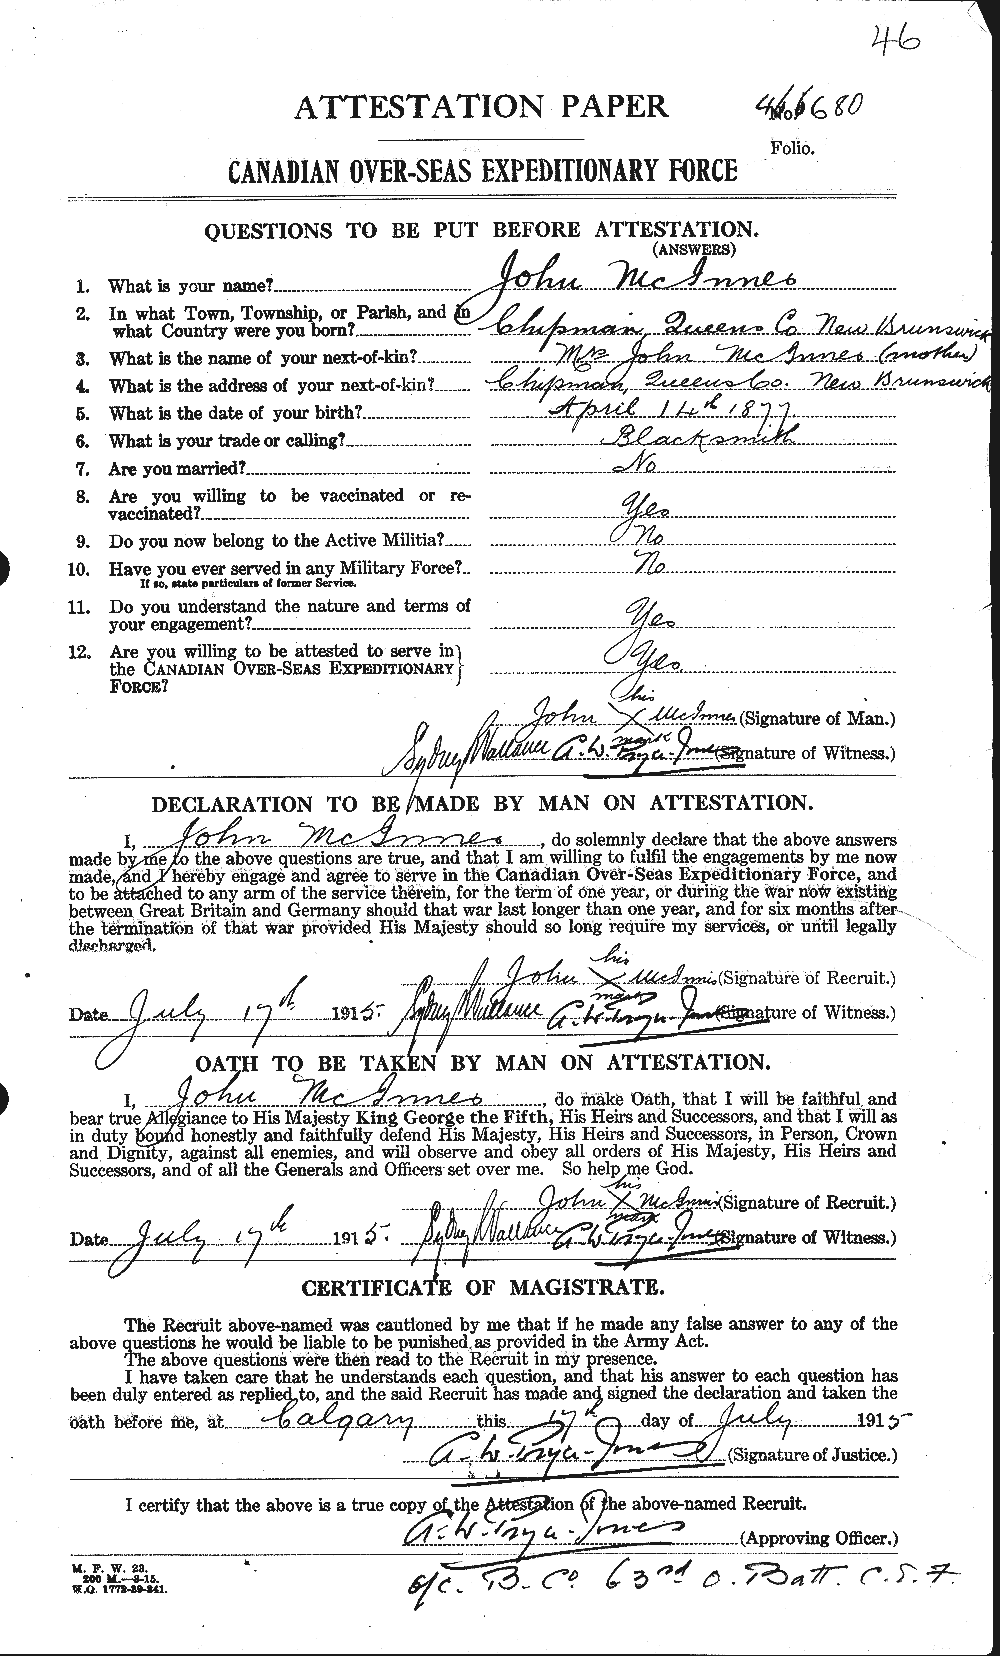 Personnel Records of the First World War - CEF 526679a